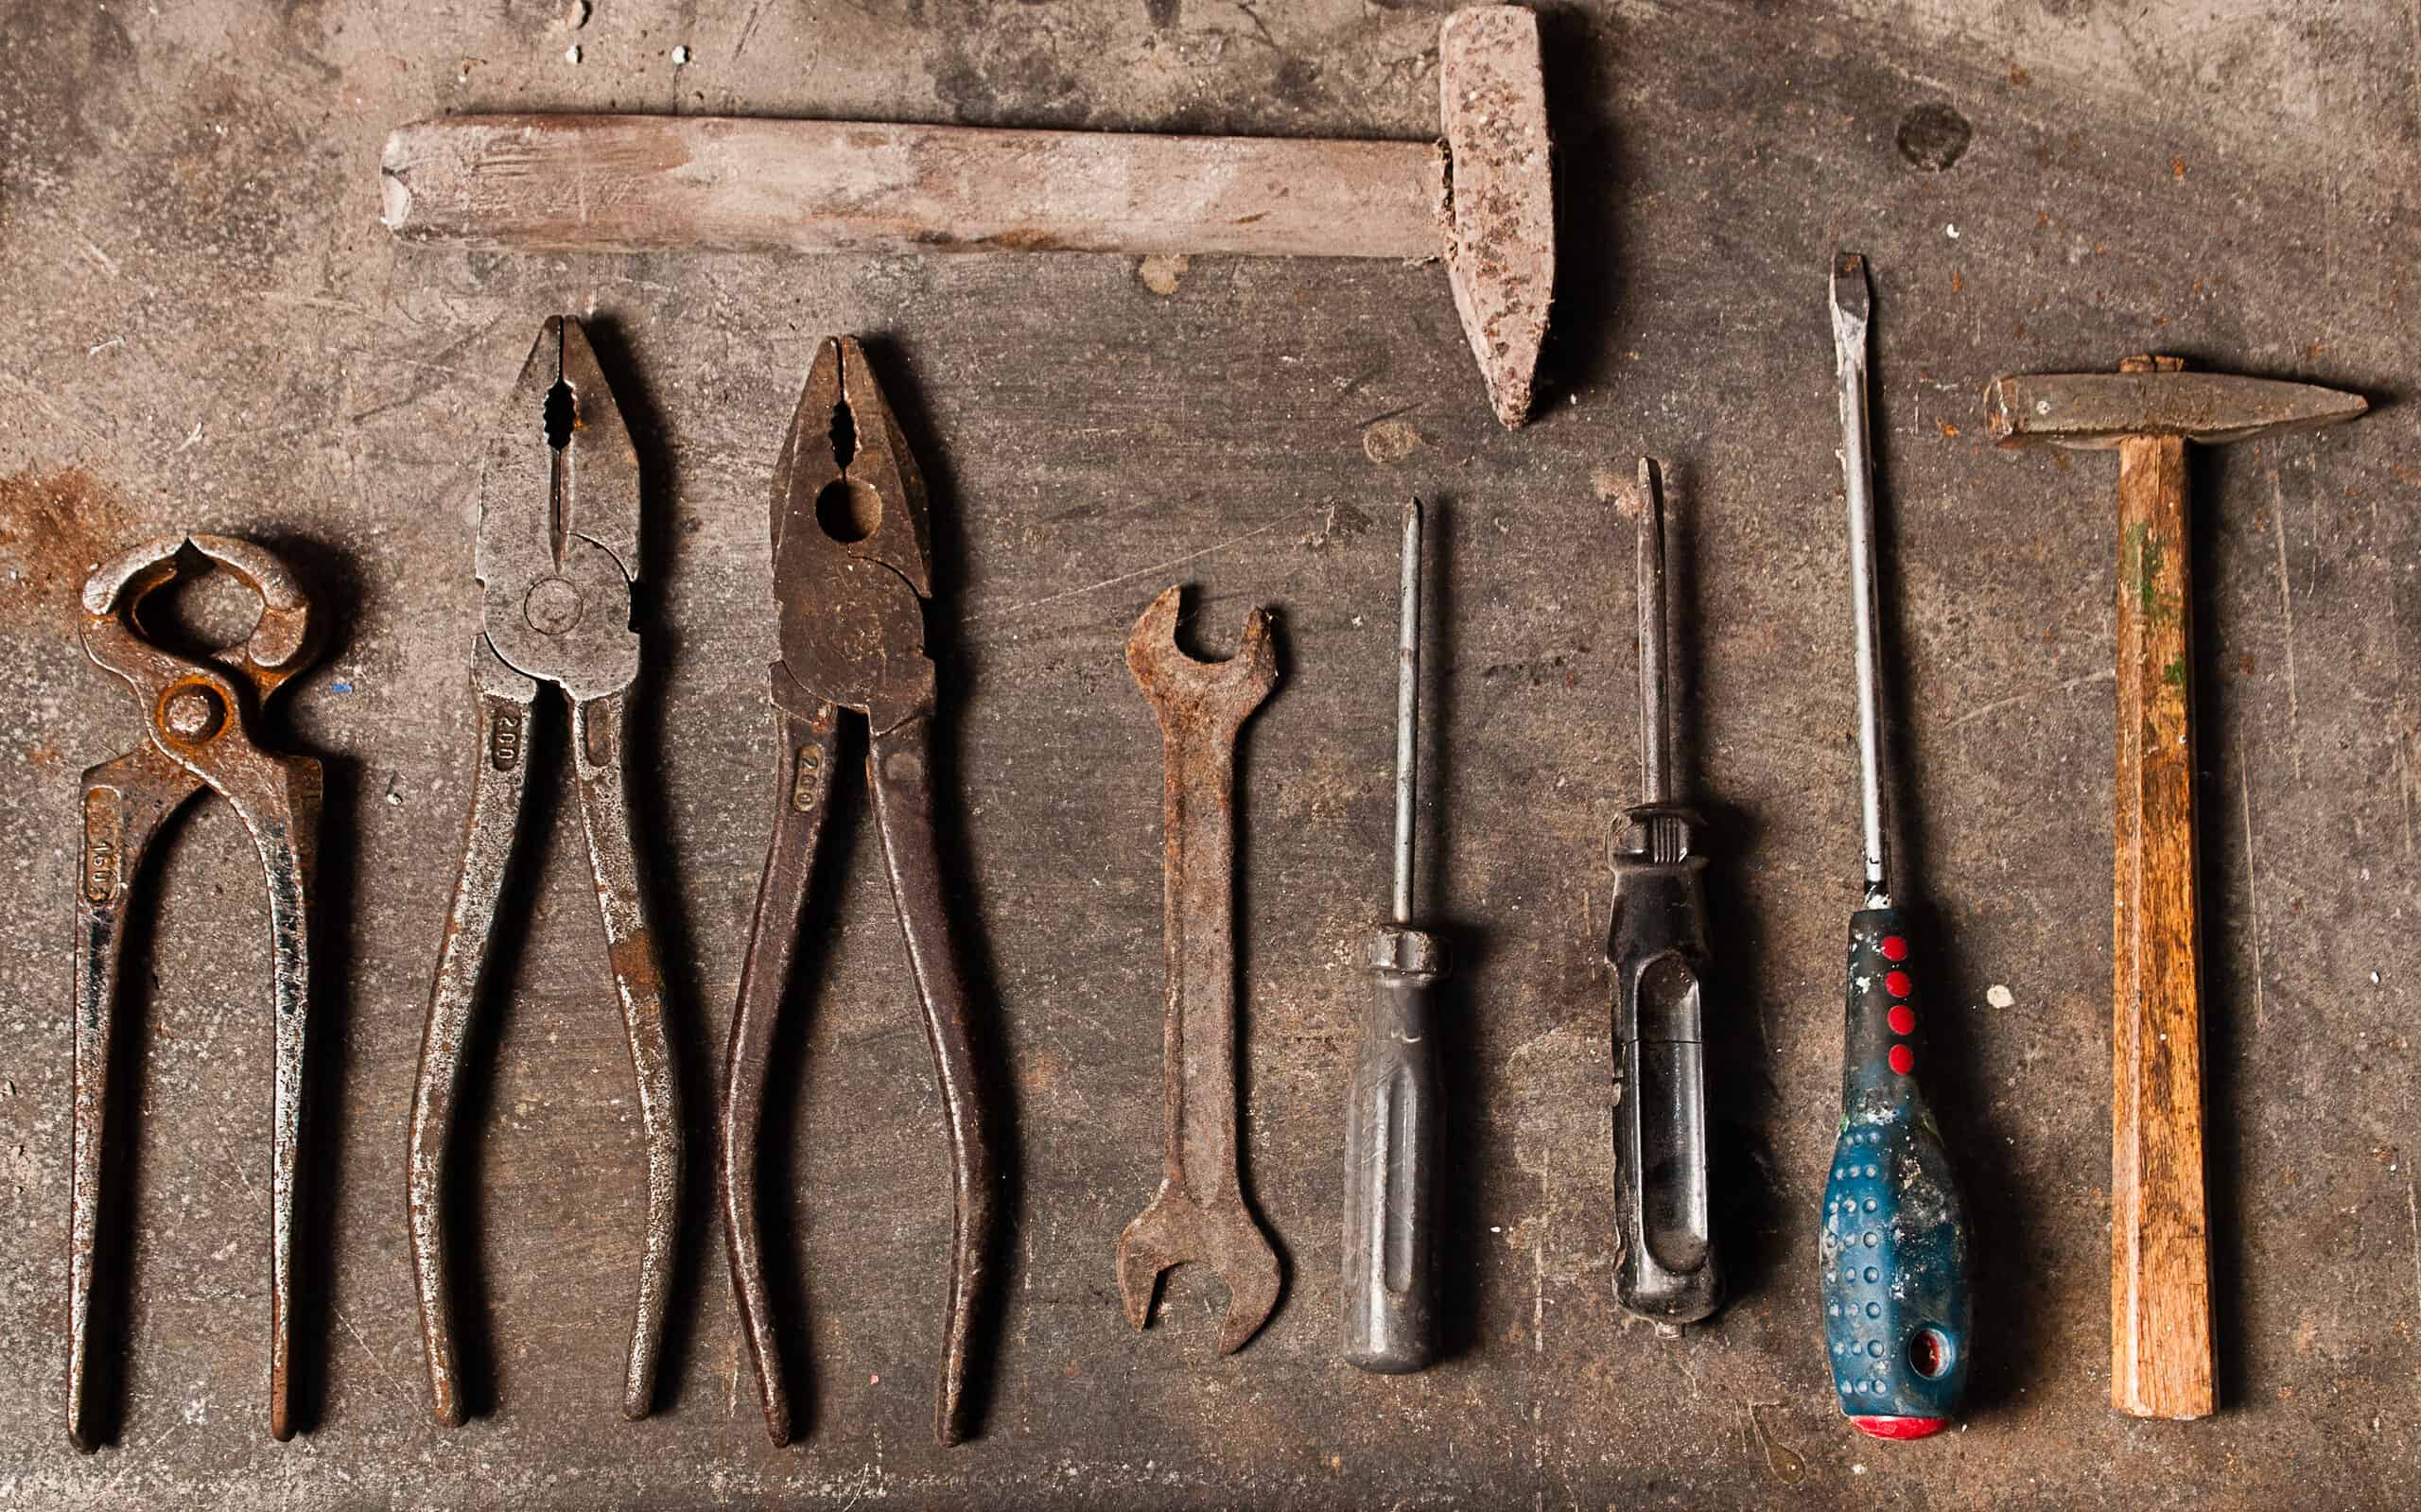 Workbench with rusty tools